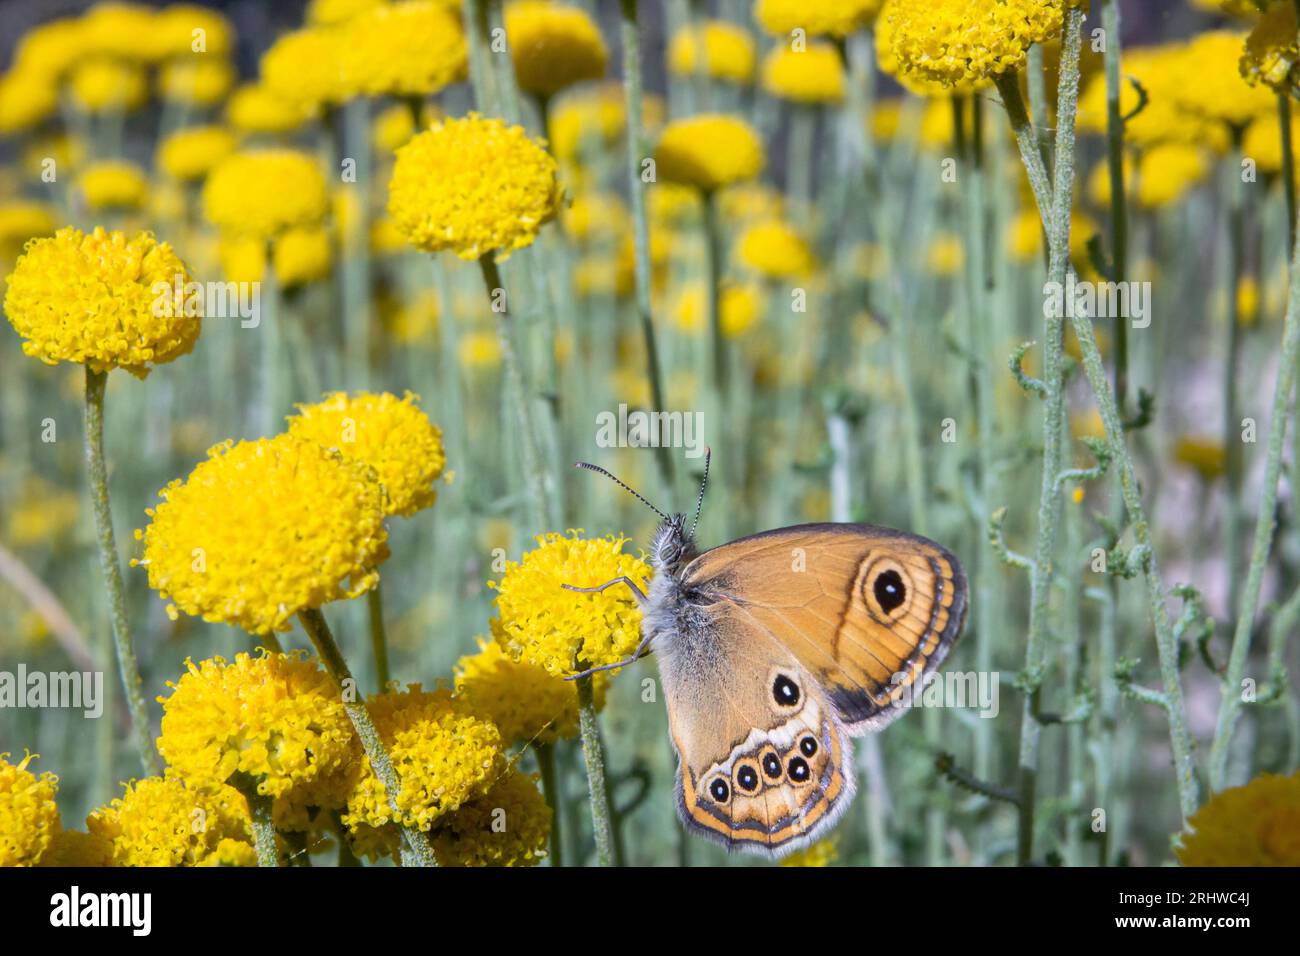 Coenonympha butterfly on chamomile flowers of the species Santolina chamaecyparissus, Alcoy, Spain Stock Photo